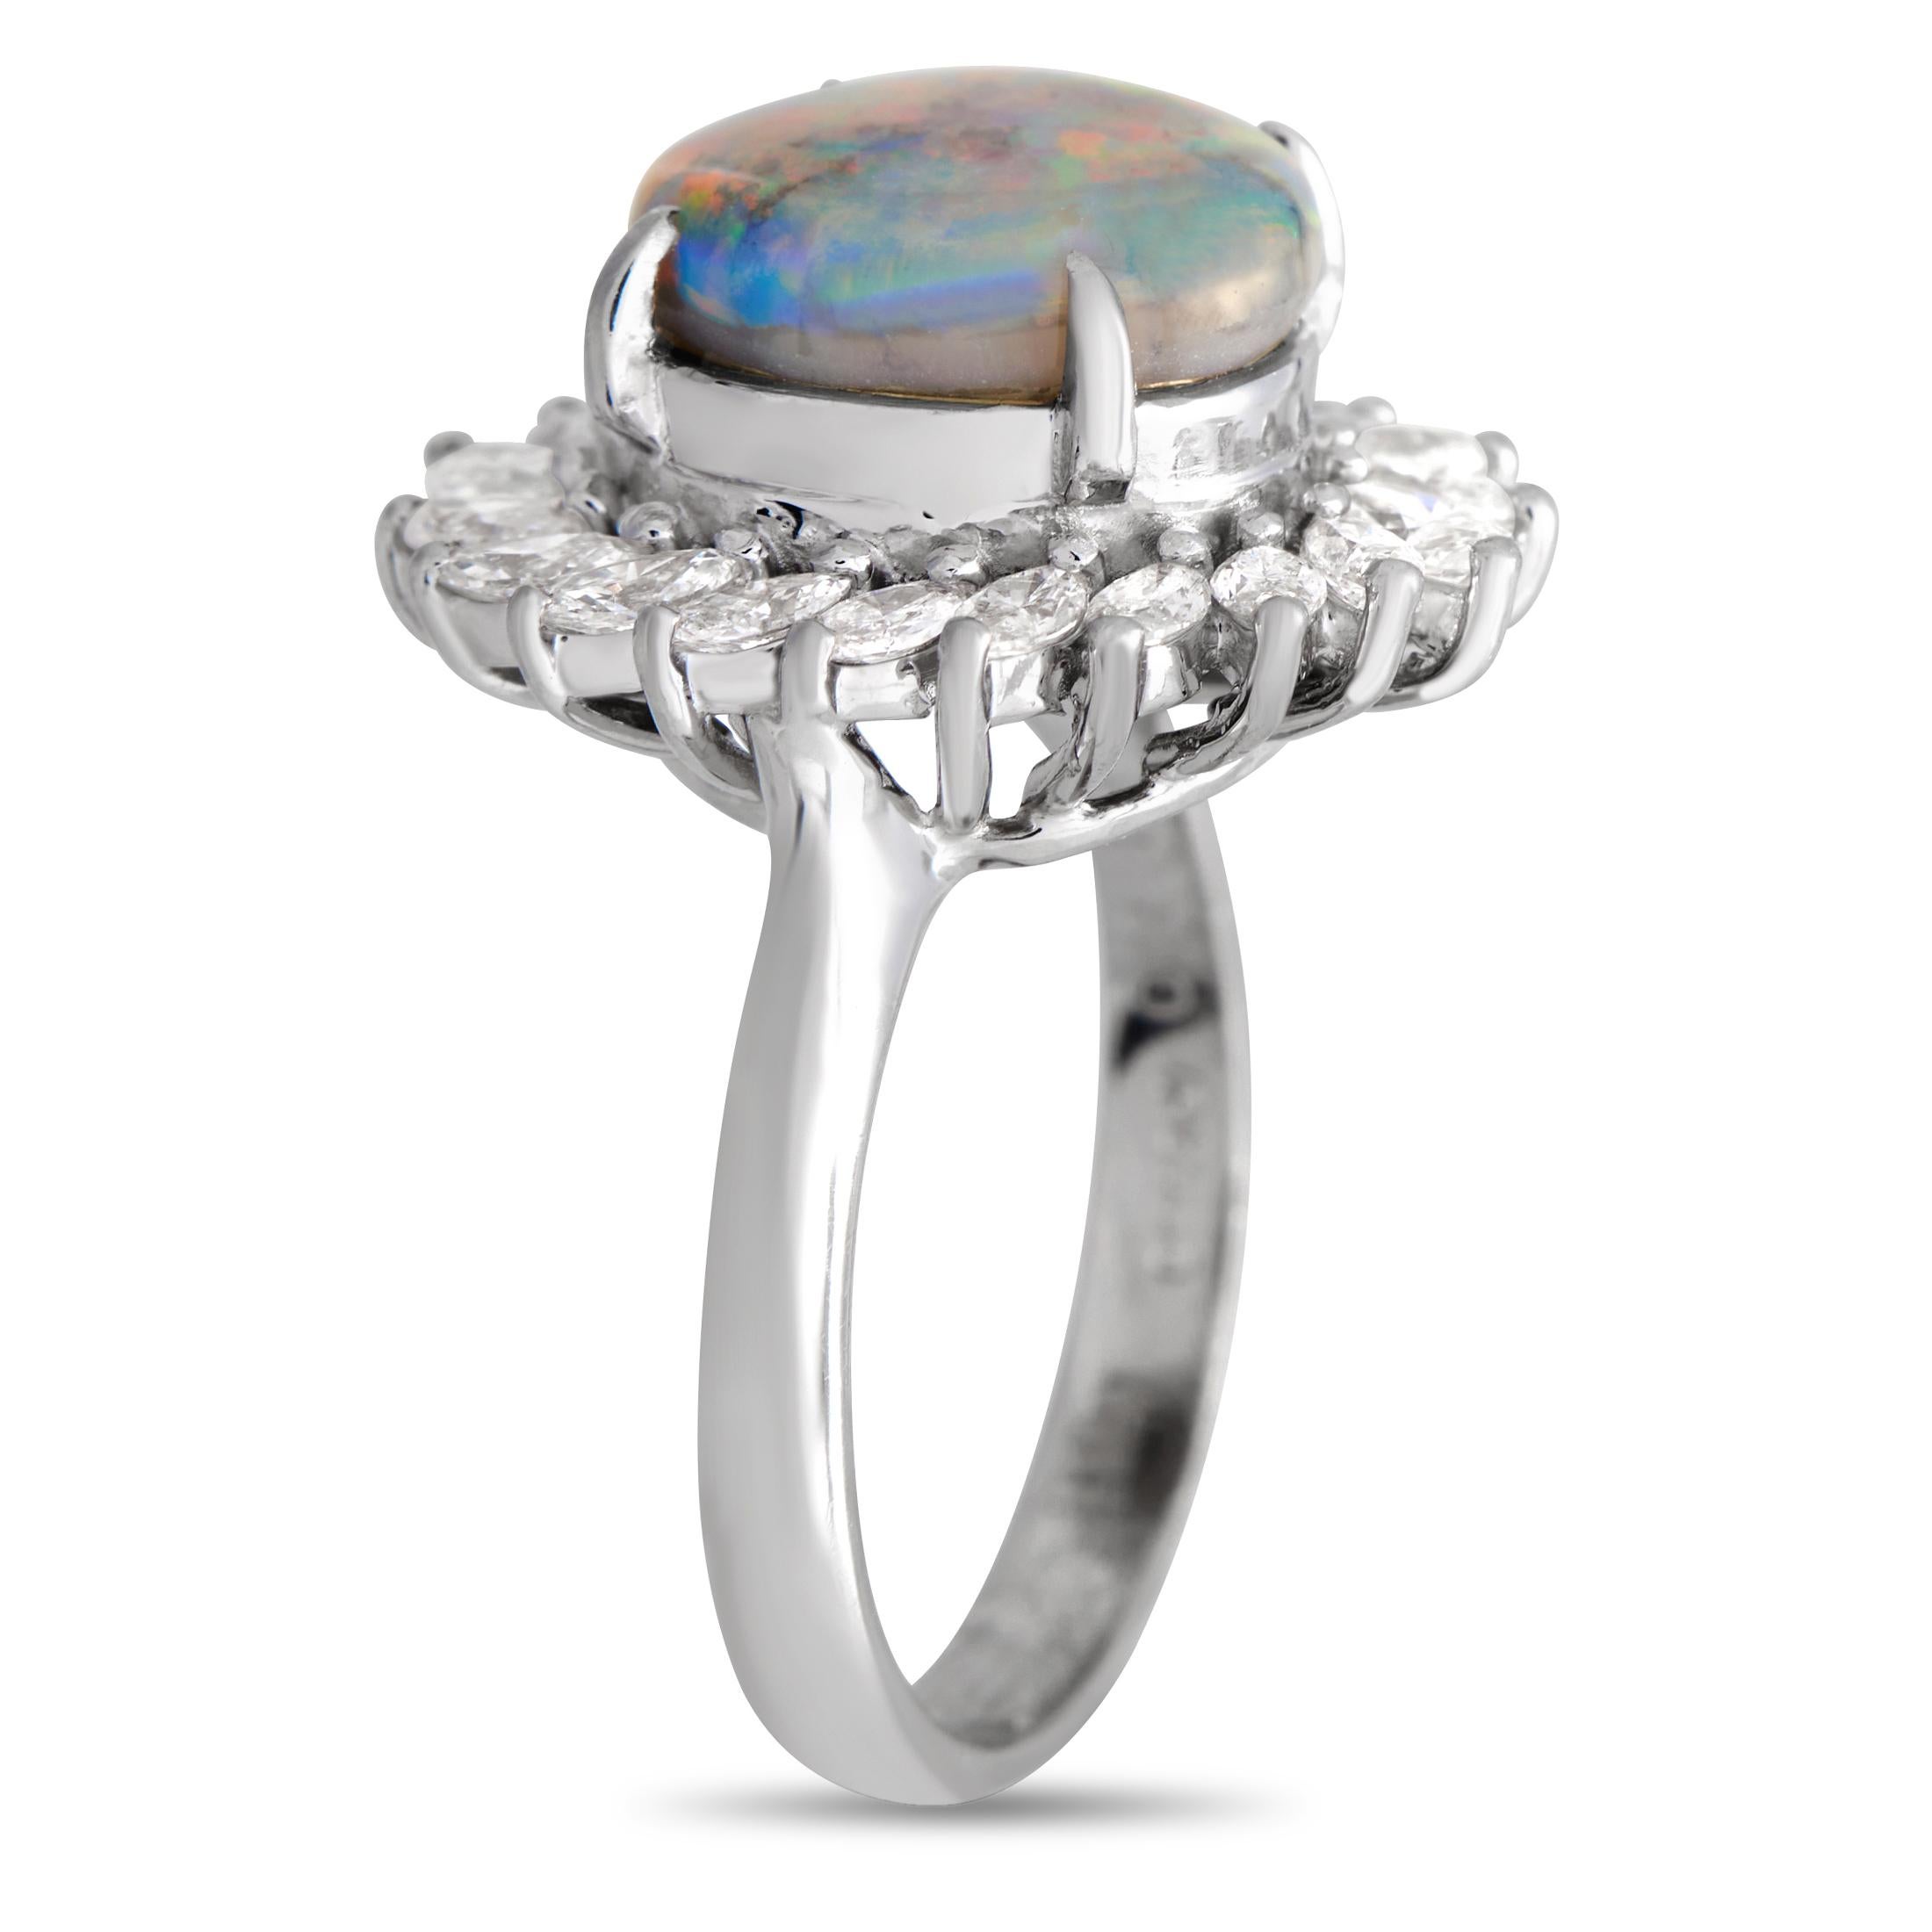 Looking for an effortless way to add a chic and luxurious touch to your looks? Wear this vintage diamond and opal ring. The ring is designed in Art Deco style, with an iridescent opal cabochon surrounded by a sunburst halo of marquise diamonds. The